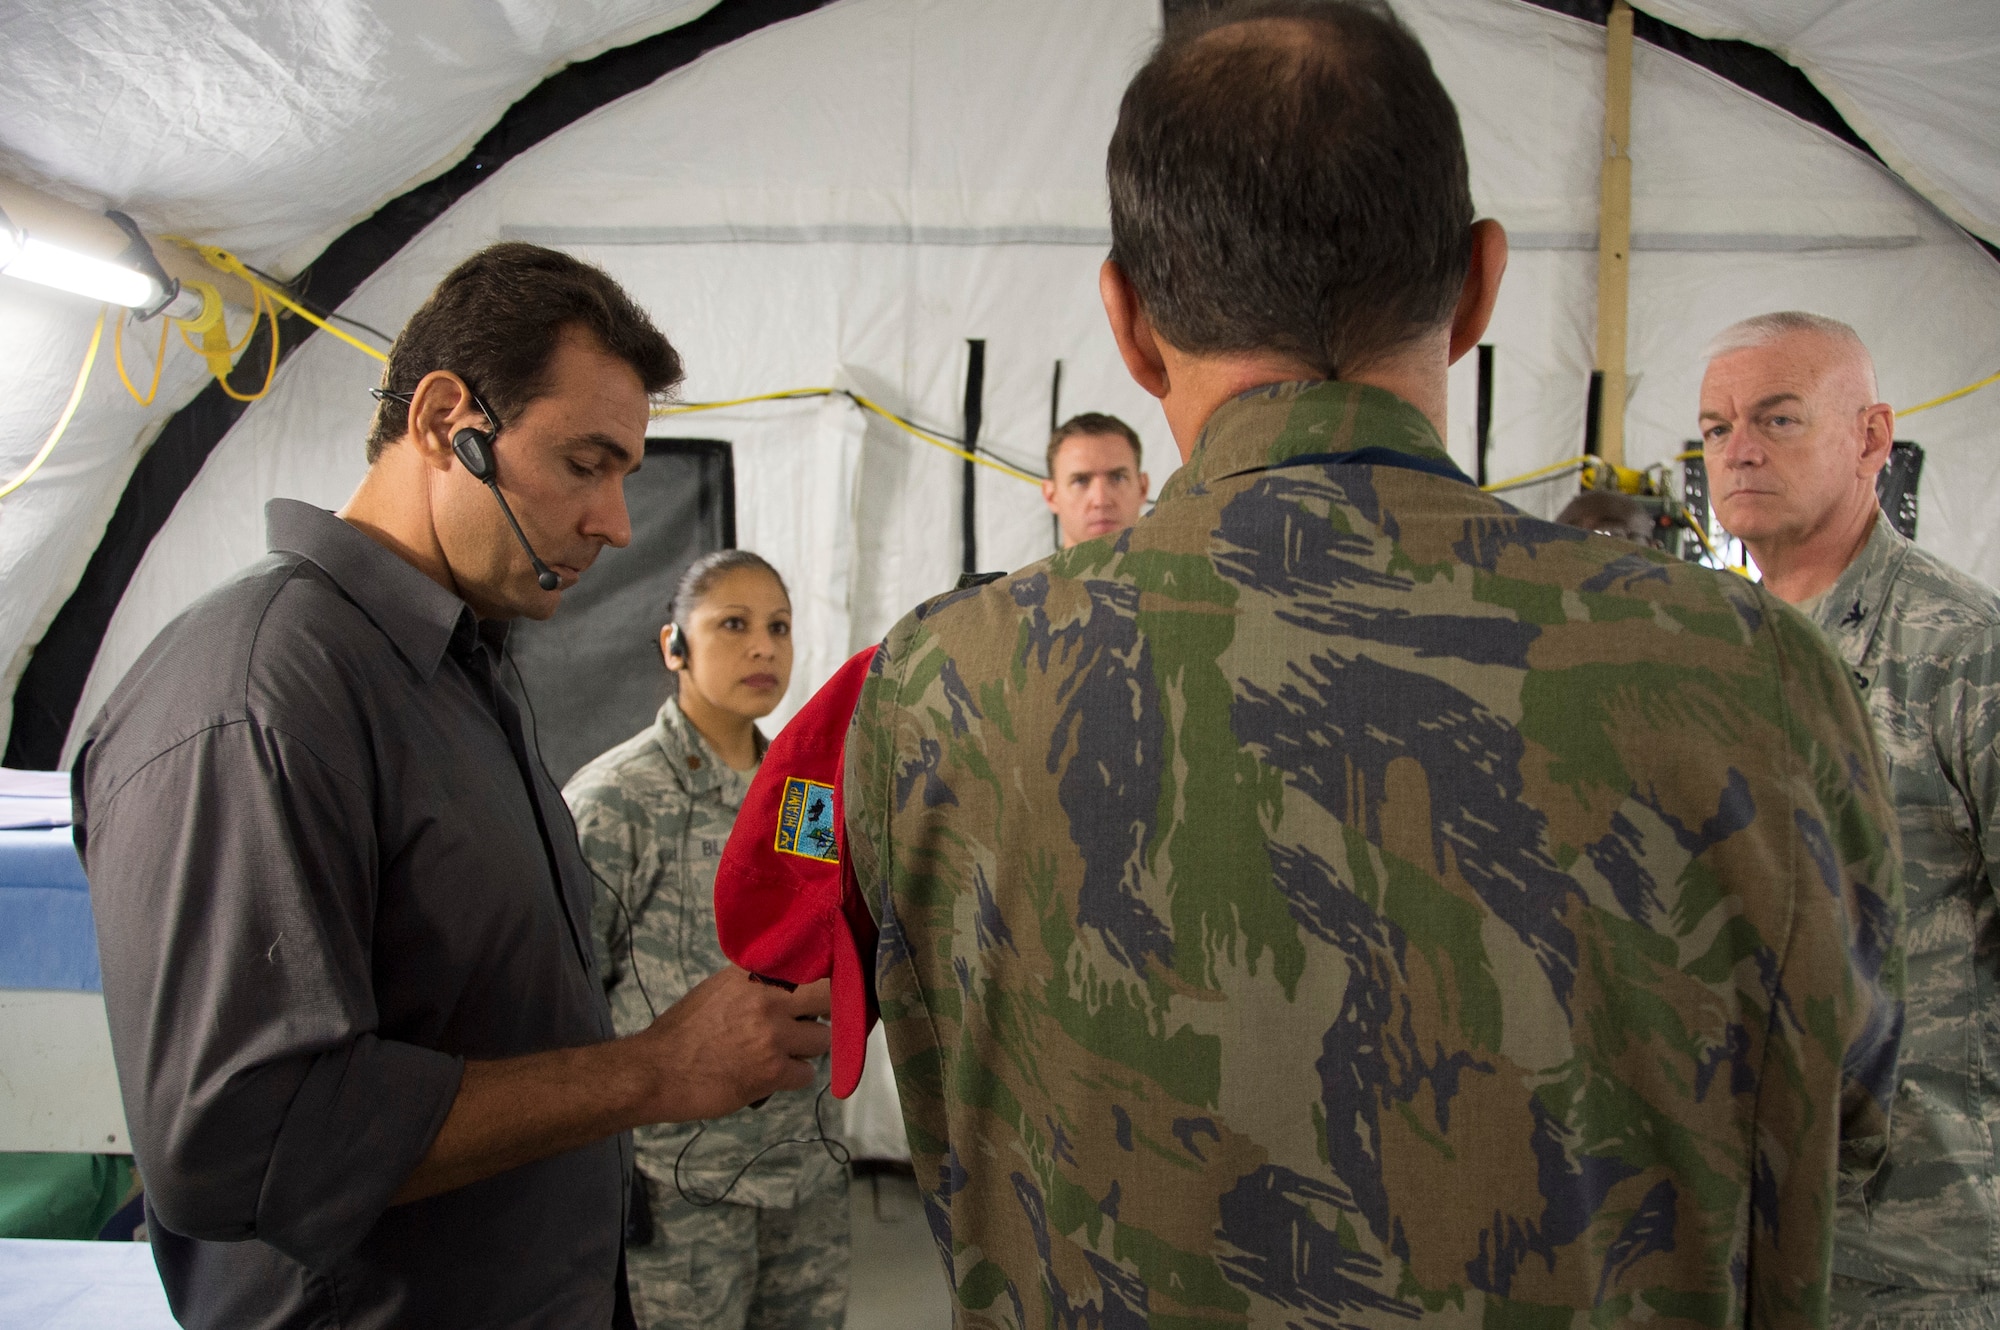 Members of Air Forces Southern speak with a member of the Brazilian air force during a brief exchange during an Expeditionary Medical Support training site visit on April 22, 2015, in Rio de Janeiro, Brazil. During the exchange the members shared insights about the current setup of the Brazilian EMEDS. (U.S. Air Force photo by Staff Sgt. Adam Grant/Released)